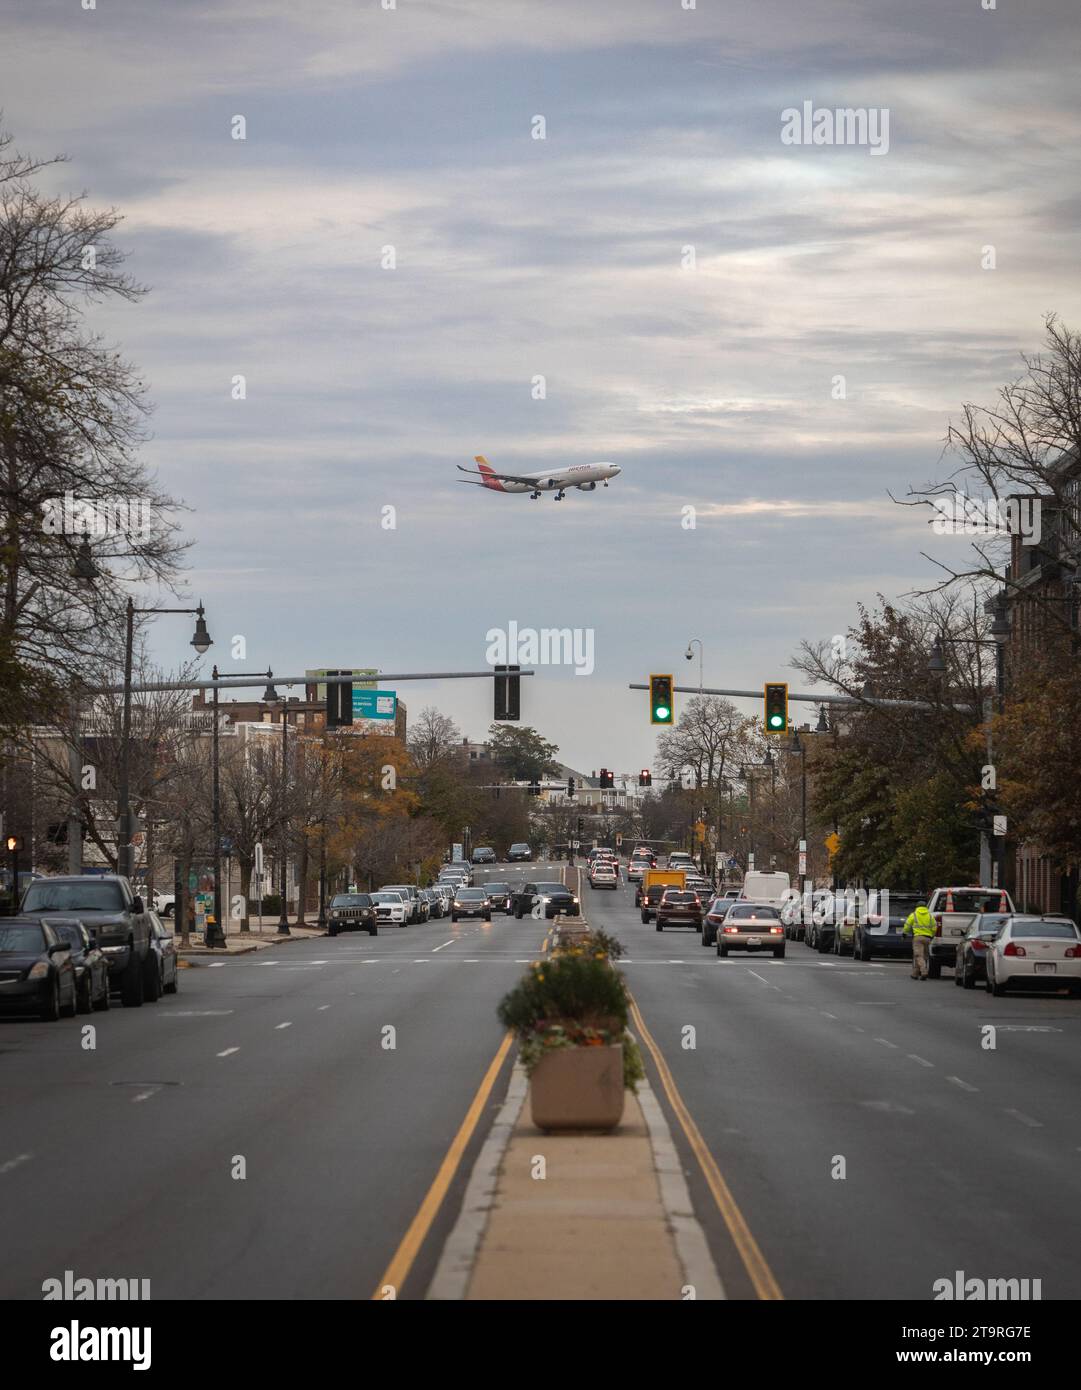 An Iberia Airlines A330 flying over a busy street prior to landing in Boston after a flight from Spain. Stock Photo